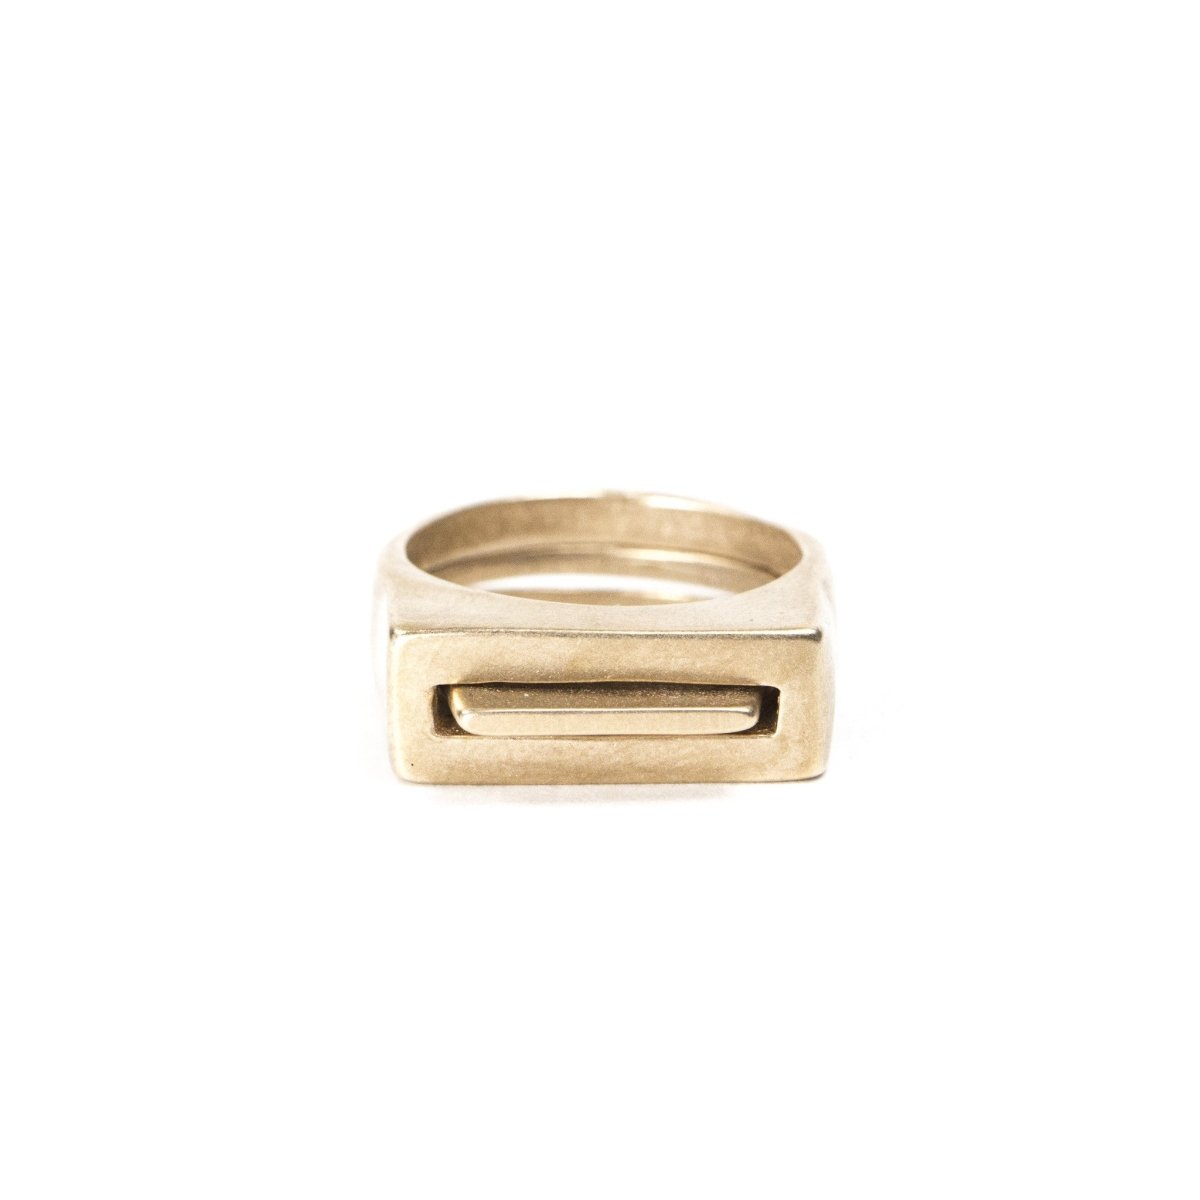 A pair of contemporary cast-bronze rings, featuring one thin ring with an elongated curve (Tuyo) fitted through a chunky ring with a rectangular cutout (Mía). Hand-crafted in Portland, Oregon. 